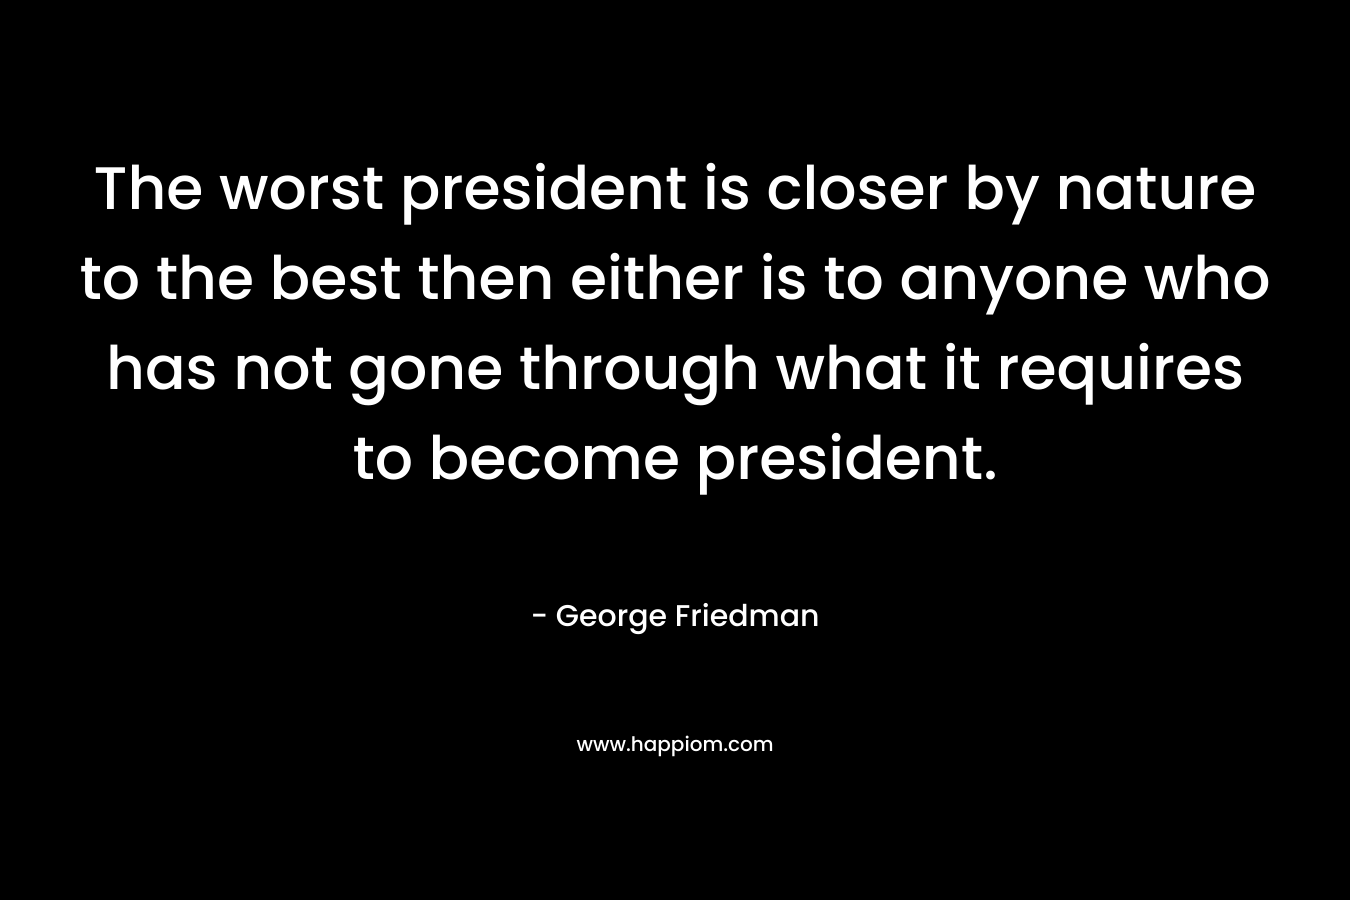 The worst president is closer by nature to the best then either is to anyone who has not gone through what it requires to become president.